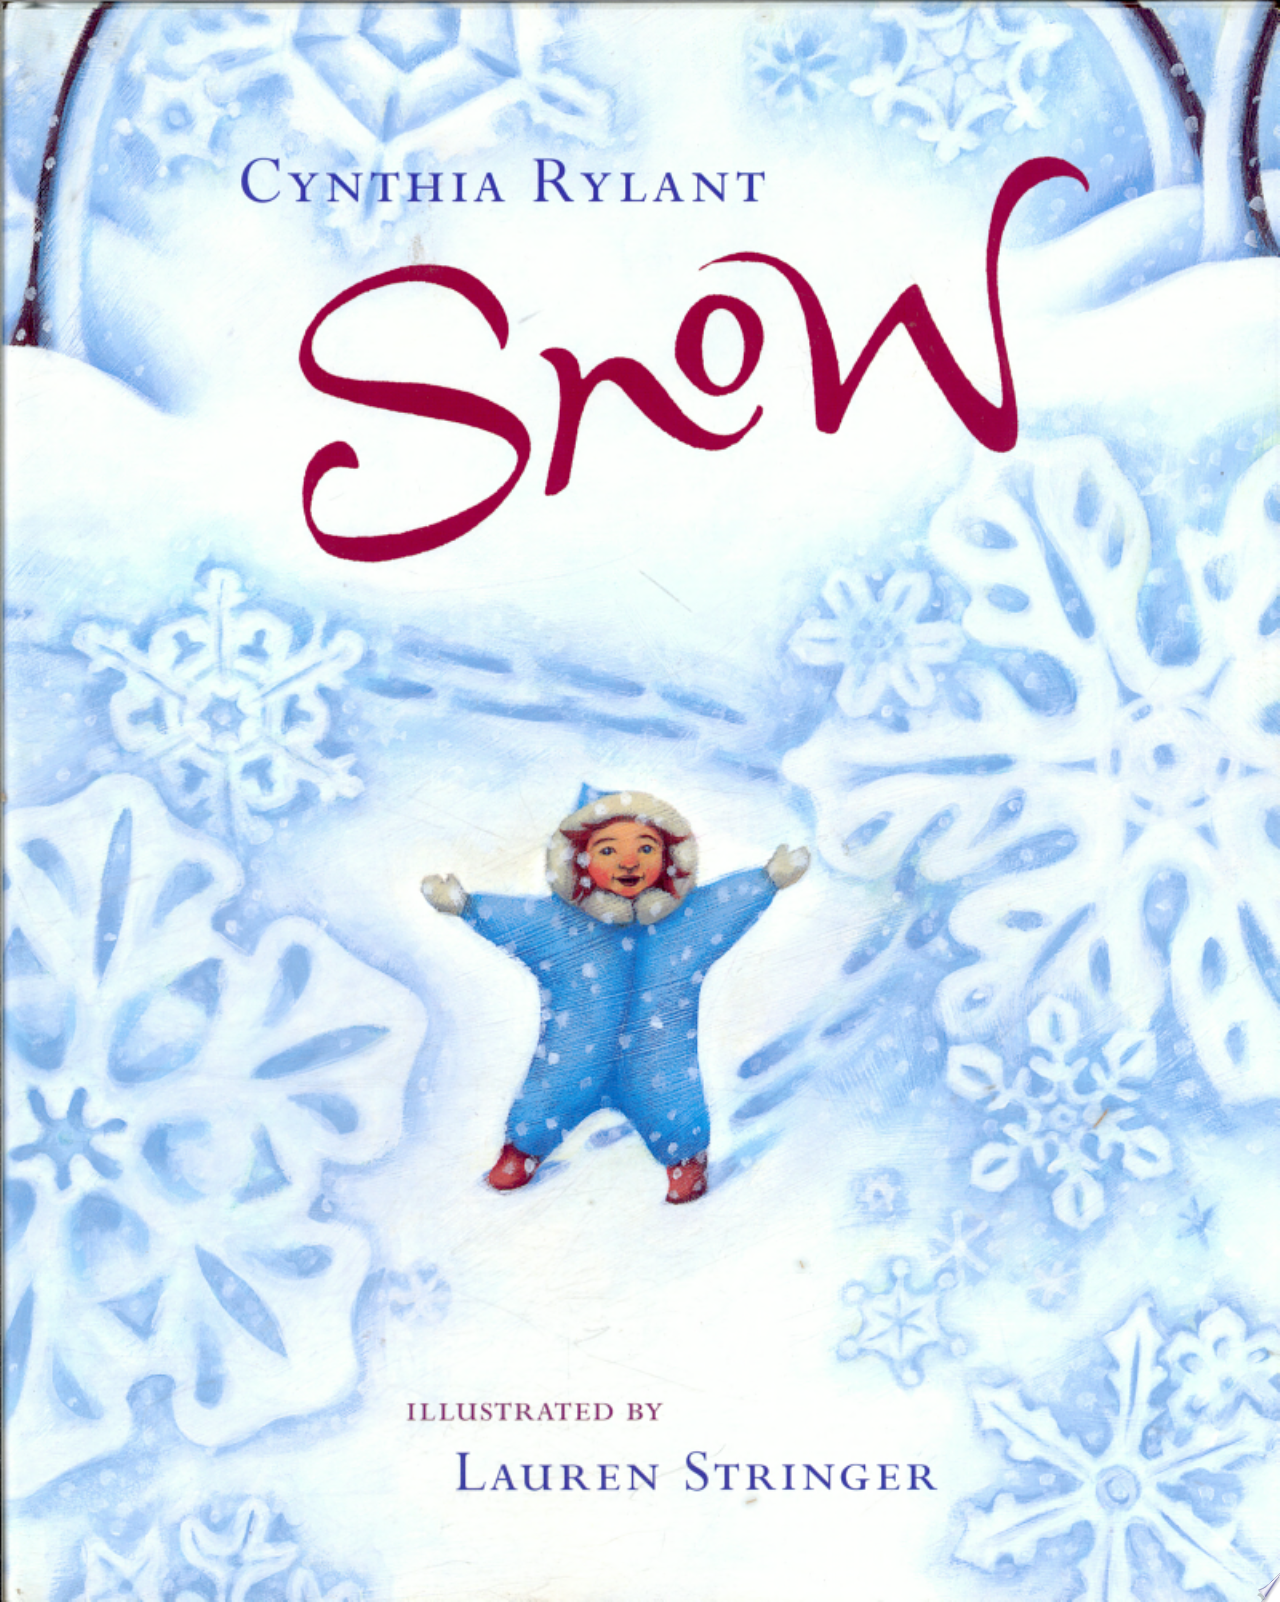 Image for "Snow"